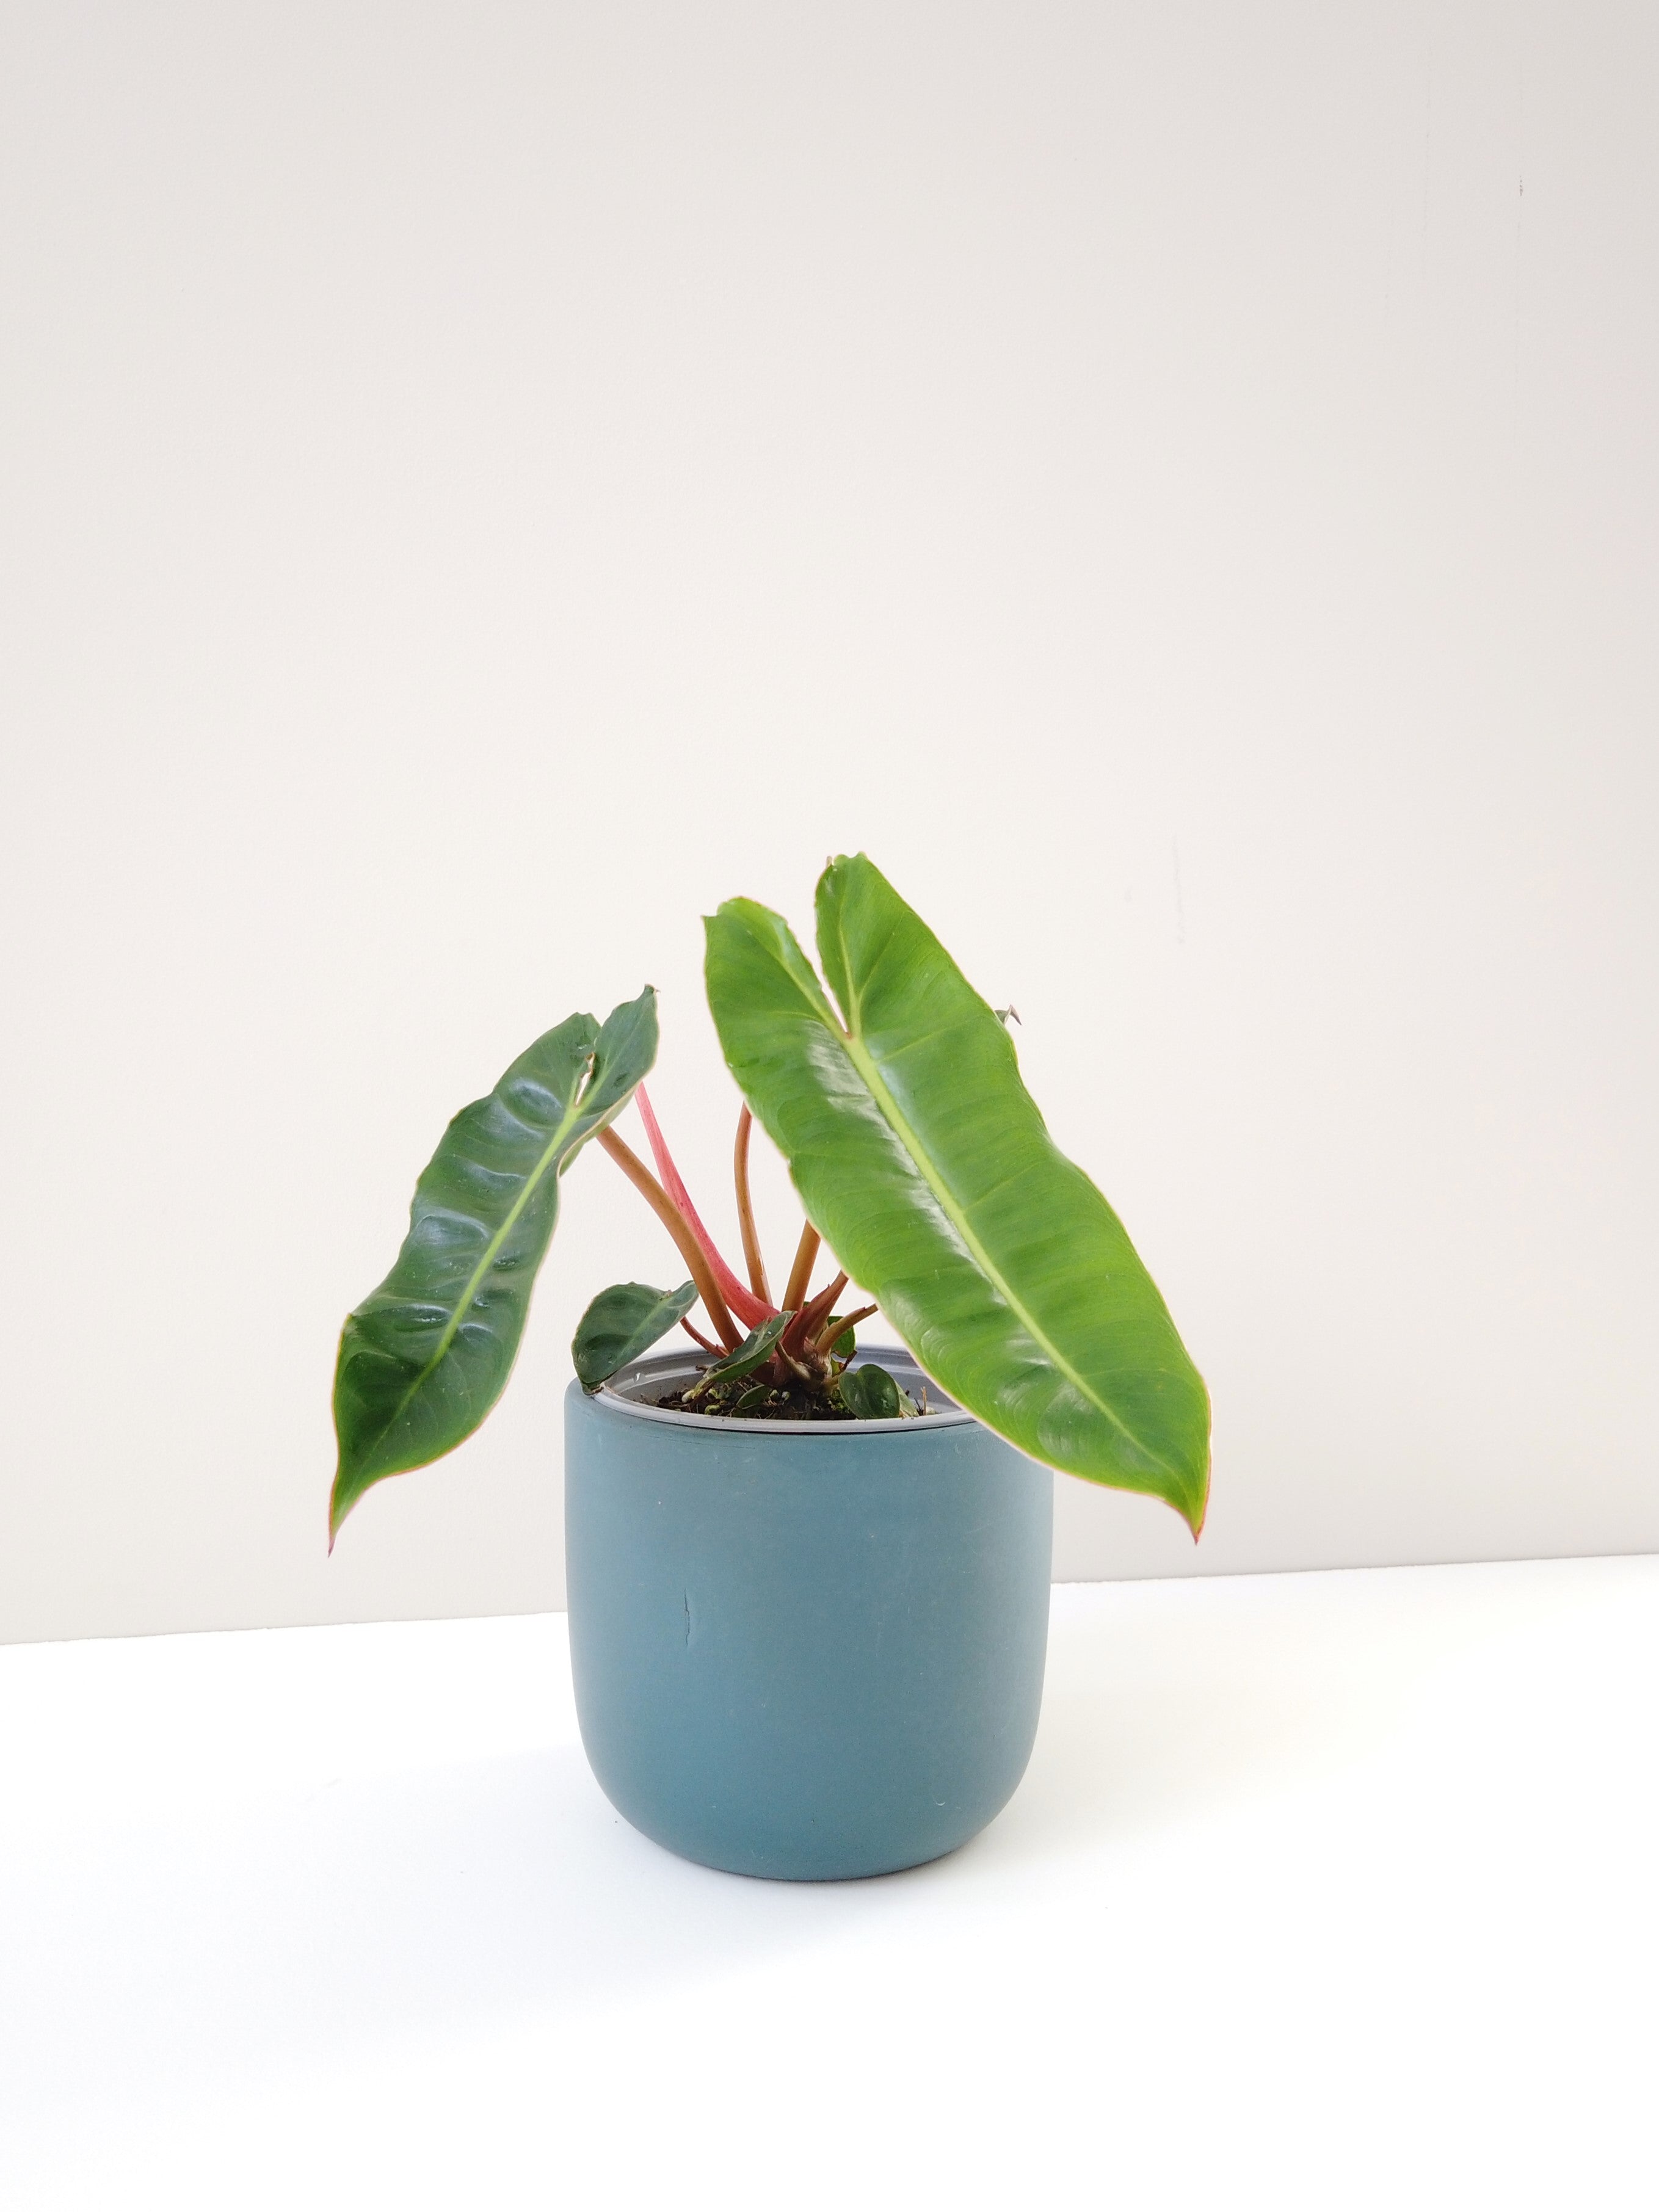 philodendron Billietiae delivered to your door